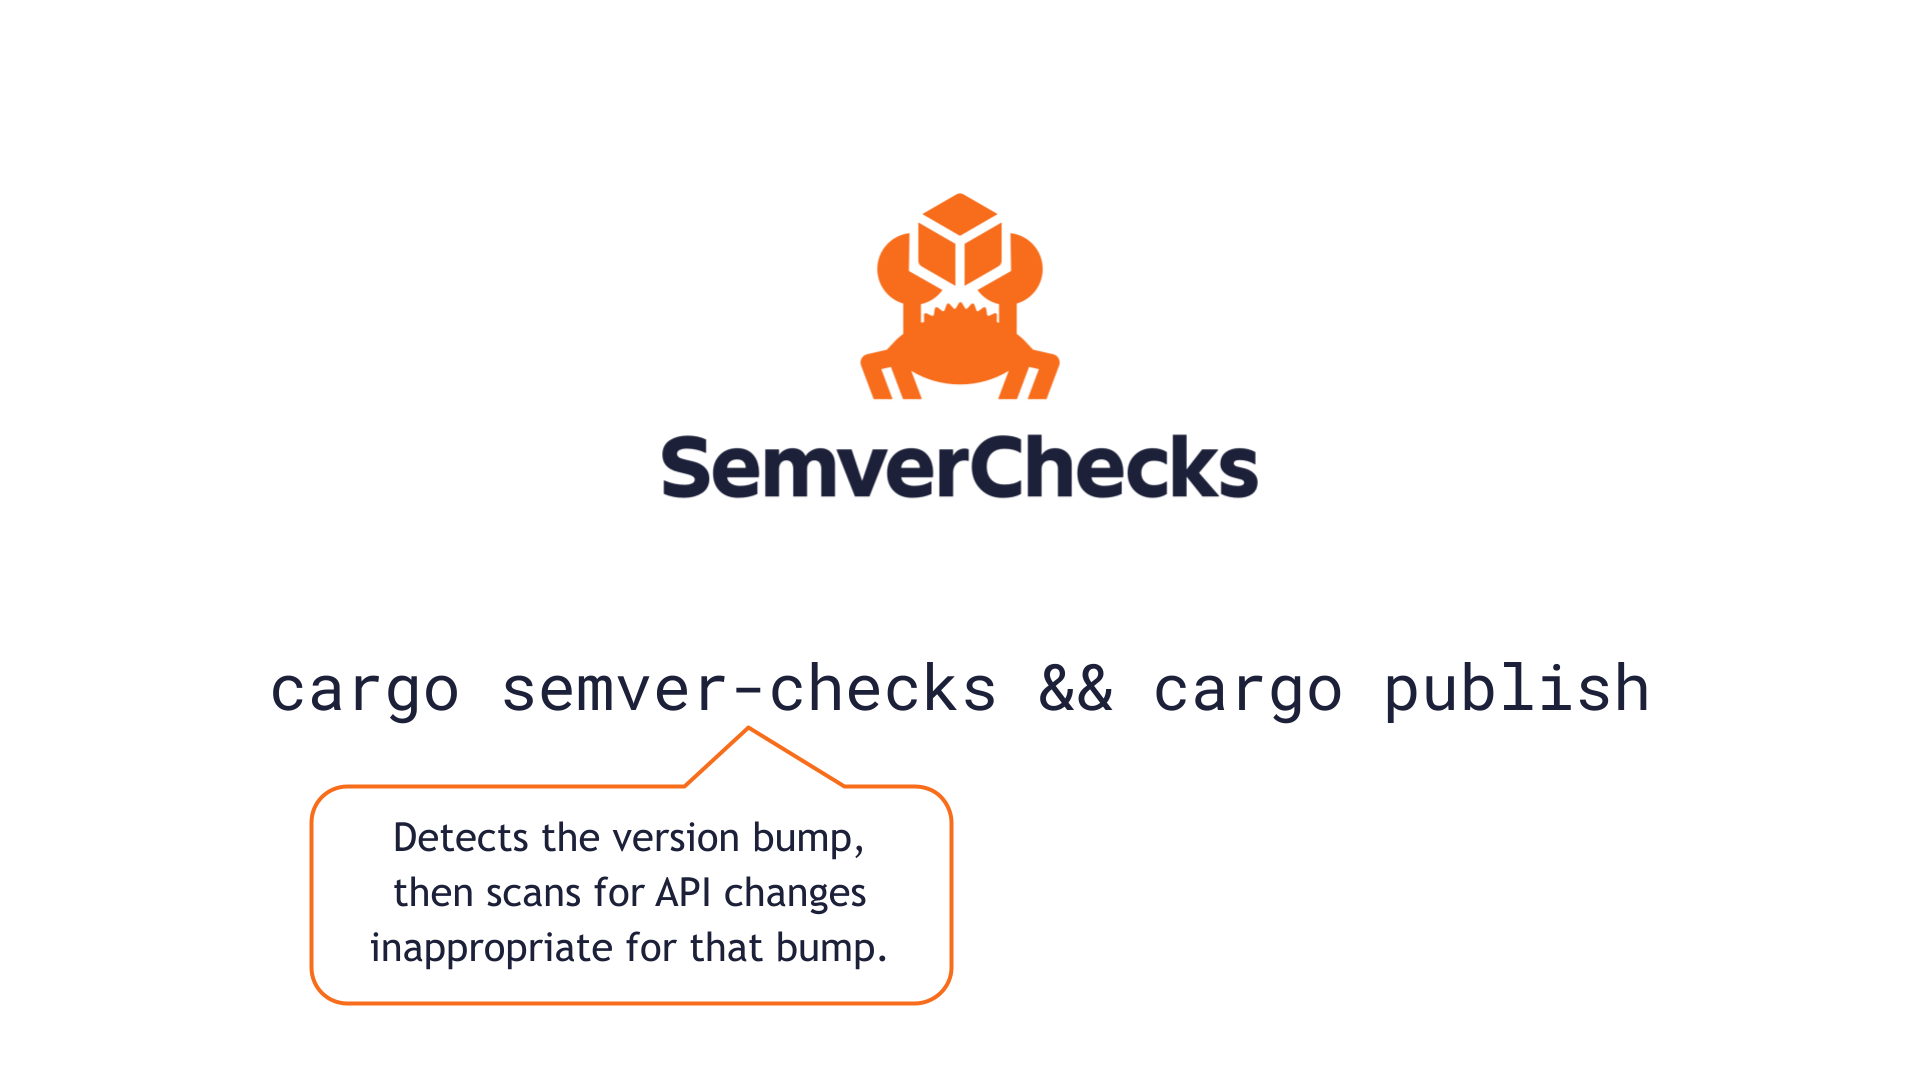 The cargo-semver-checks logo, shown together with the intended usage command: `cargo semver-checks && cargo publish`. A text bubble explains that in this invocation, the `cargo semver-checks` command detects the version bump, then scans for API changes inappropriate for that bump.